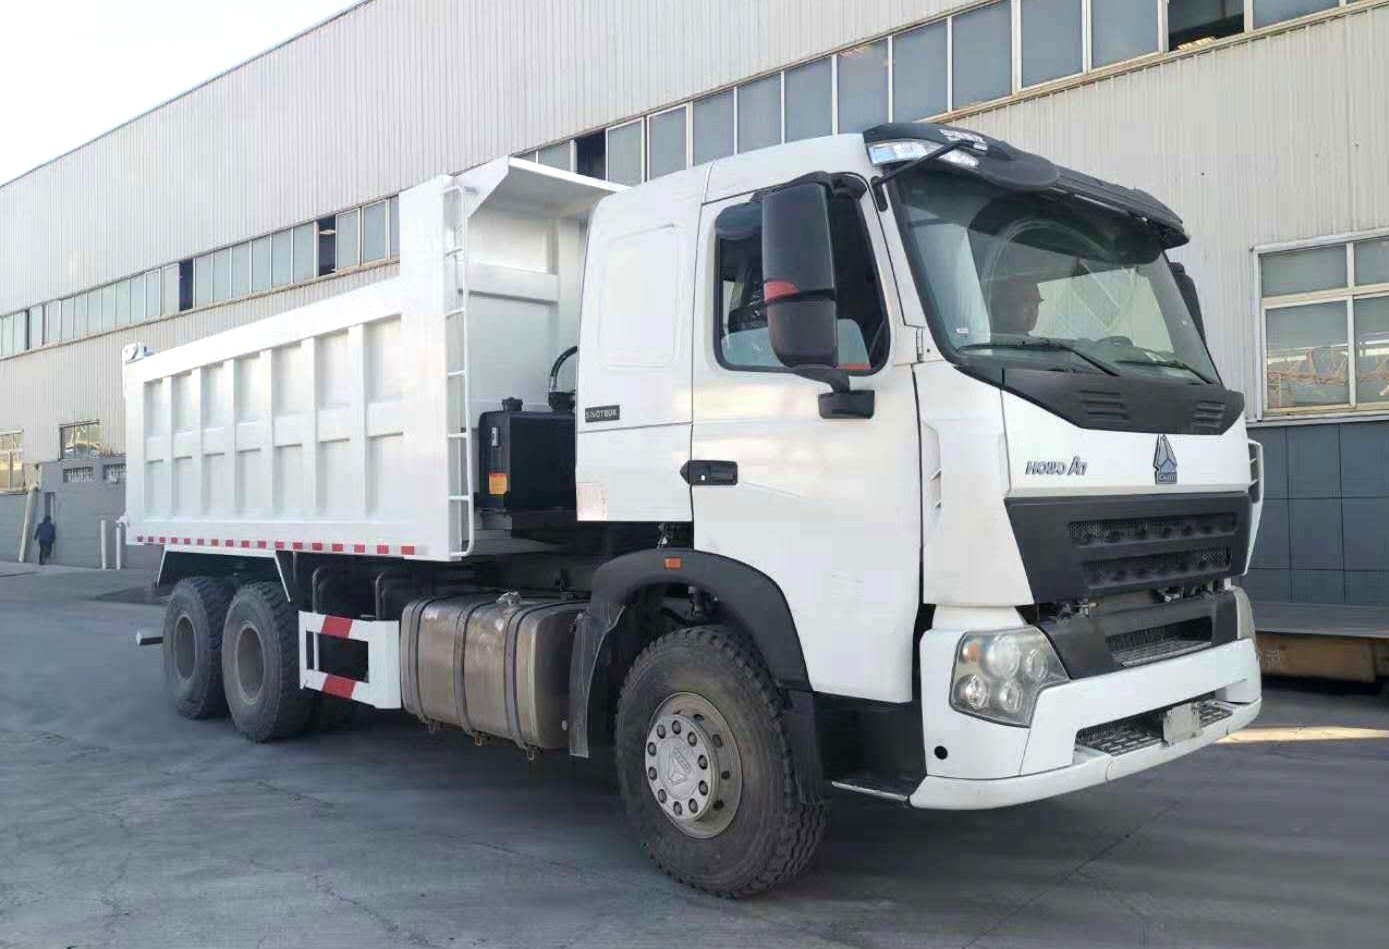 Brand New HOWO 6*4 A7 Dump Truck in Stock